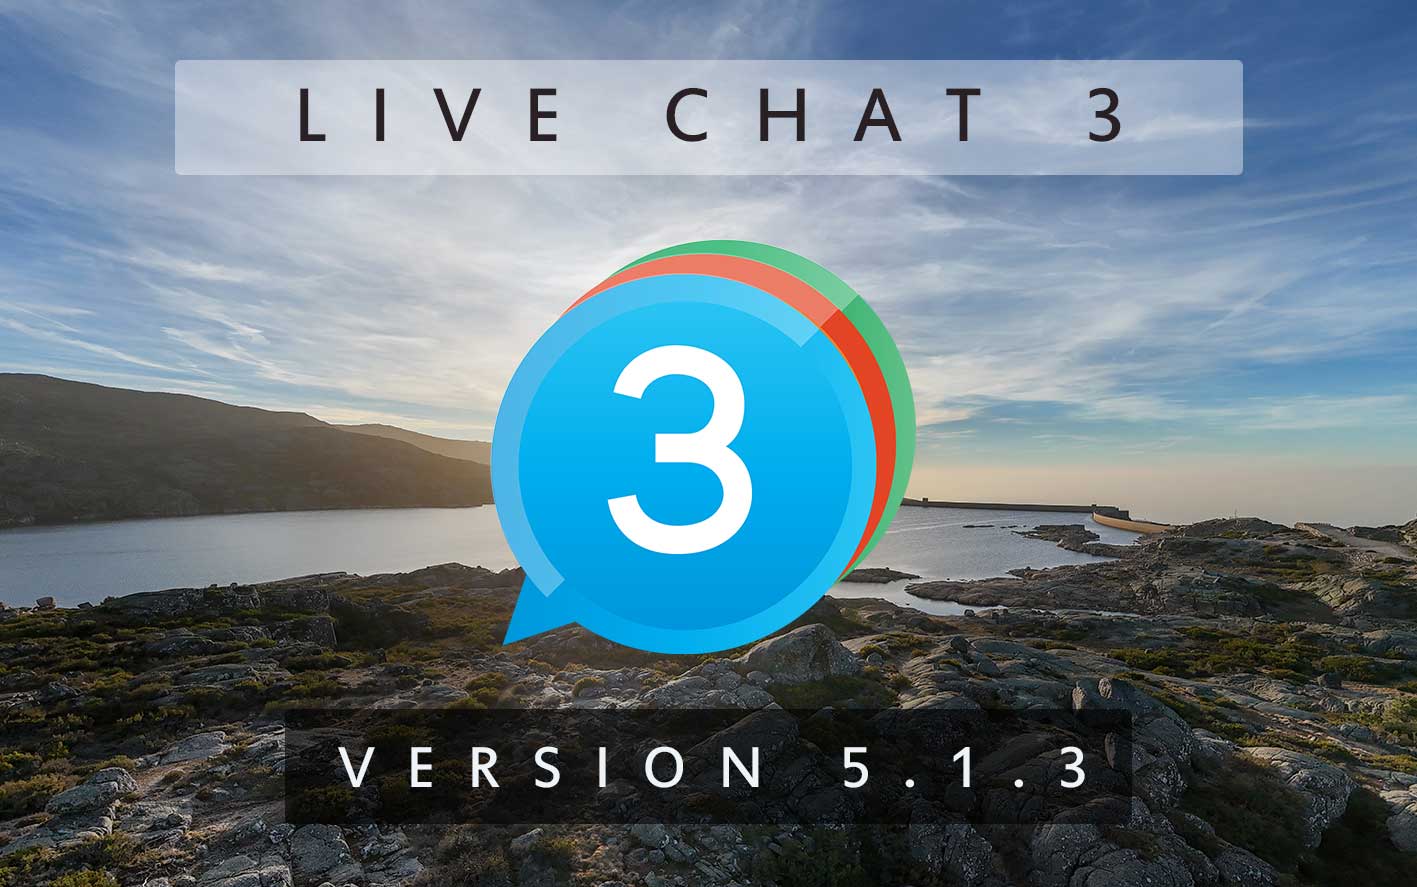 Live Chat 3 - Version 5.1.3